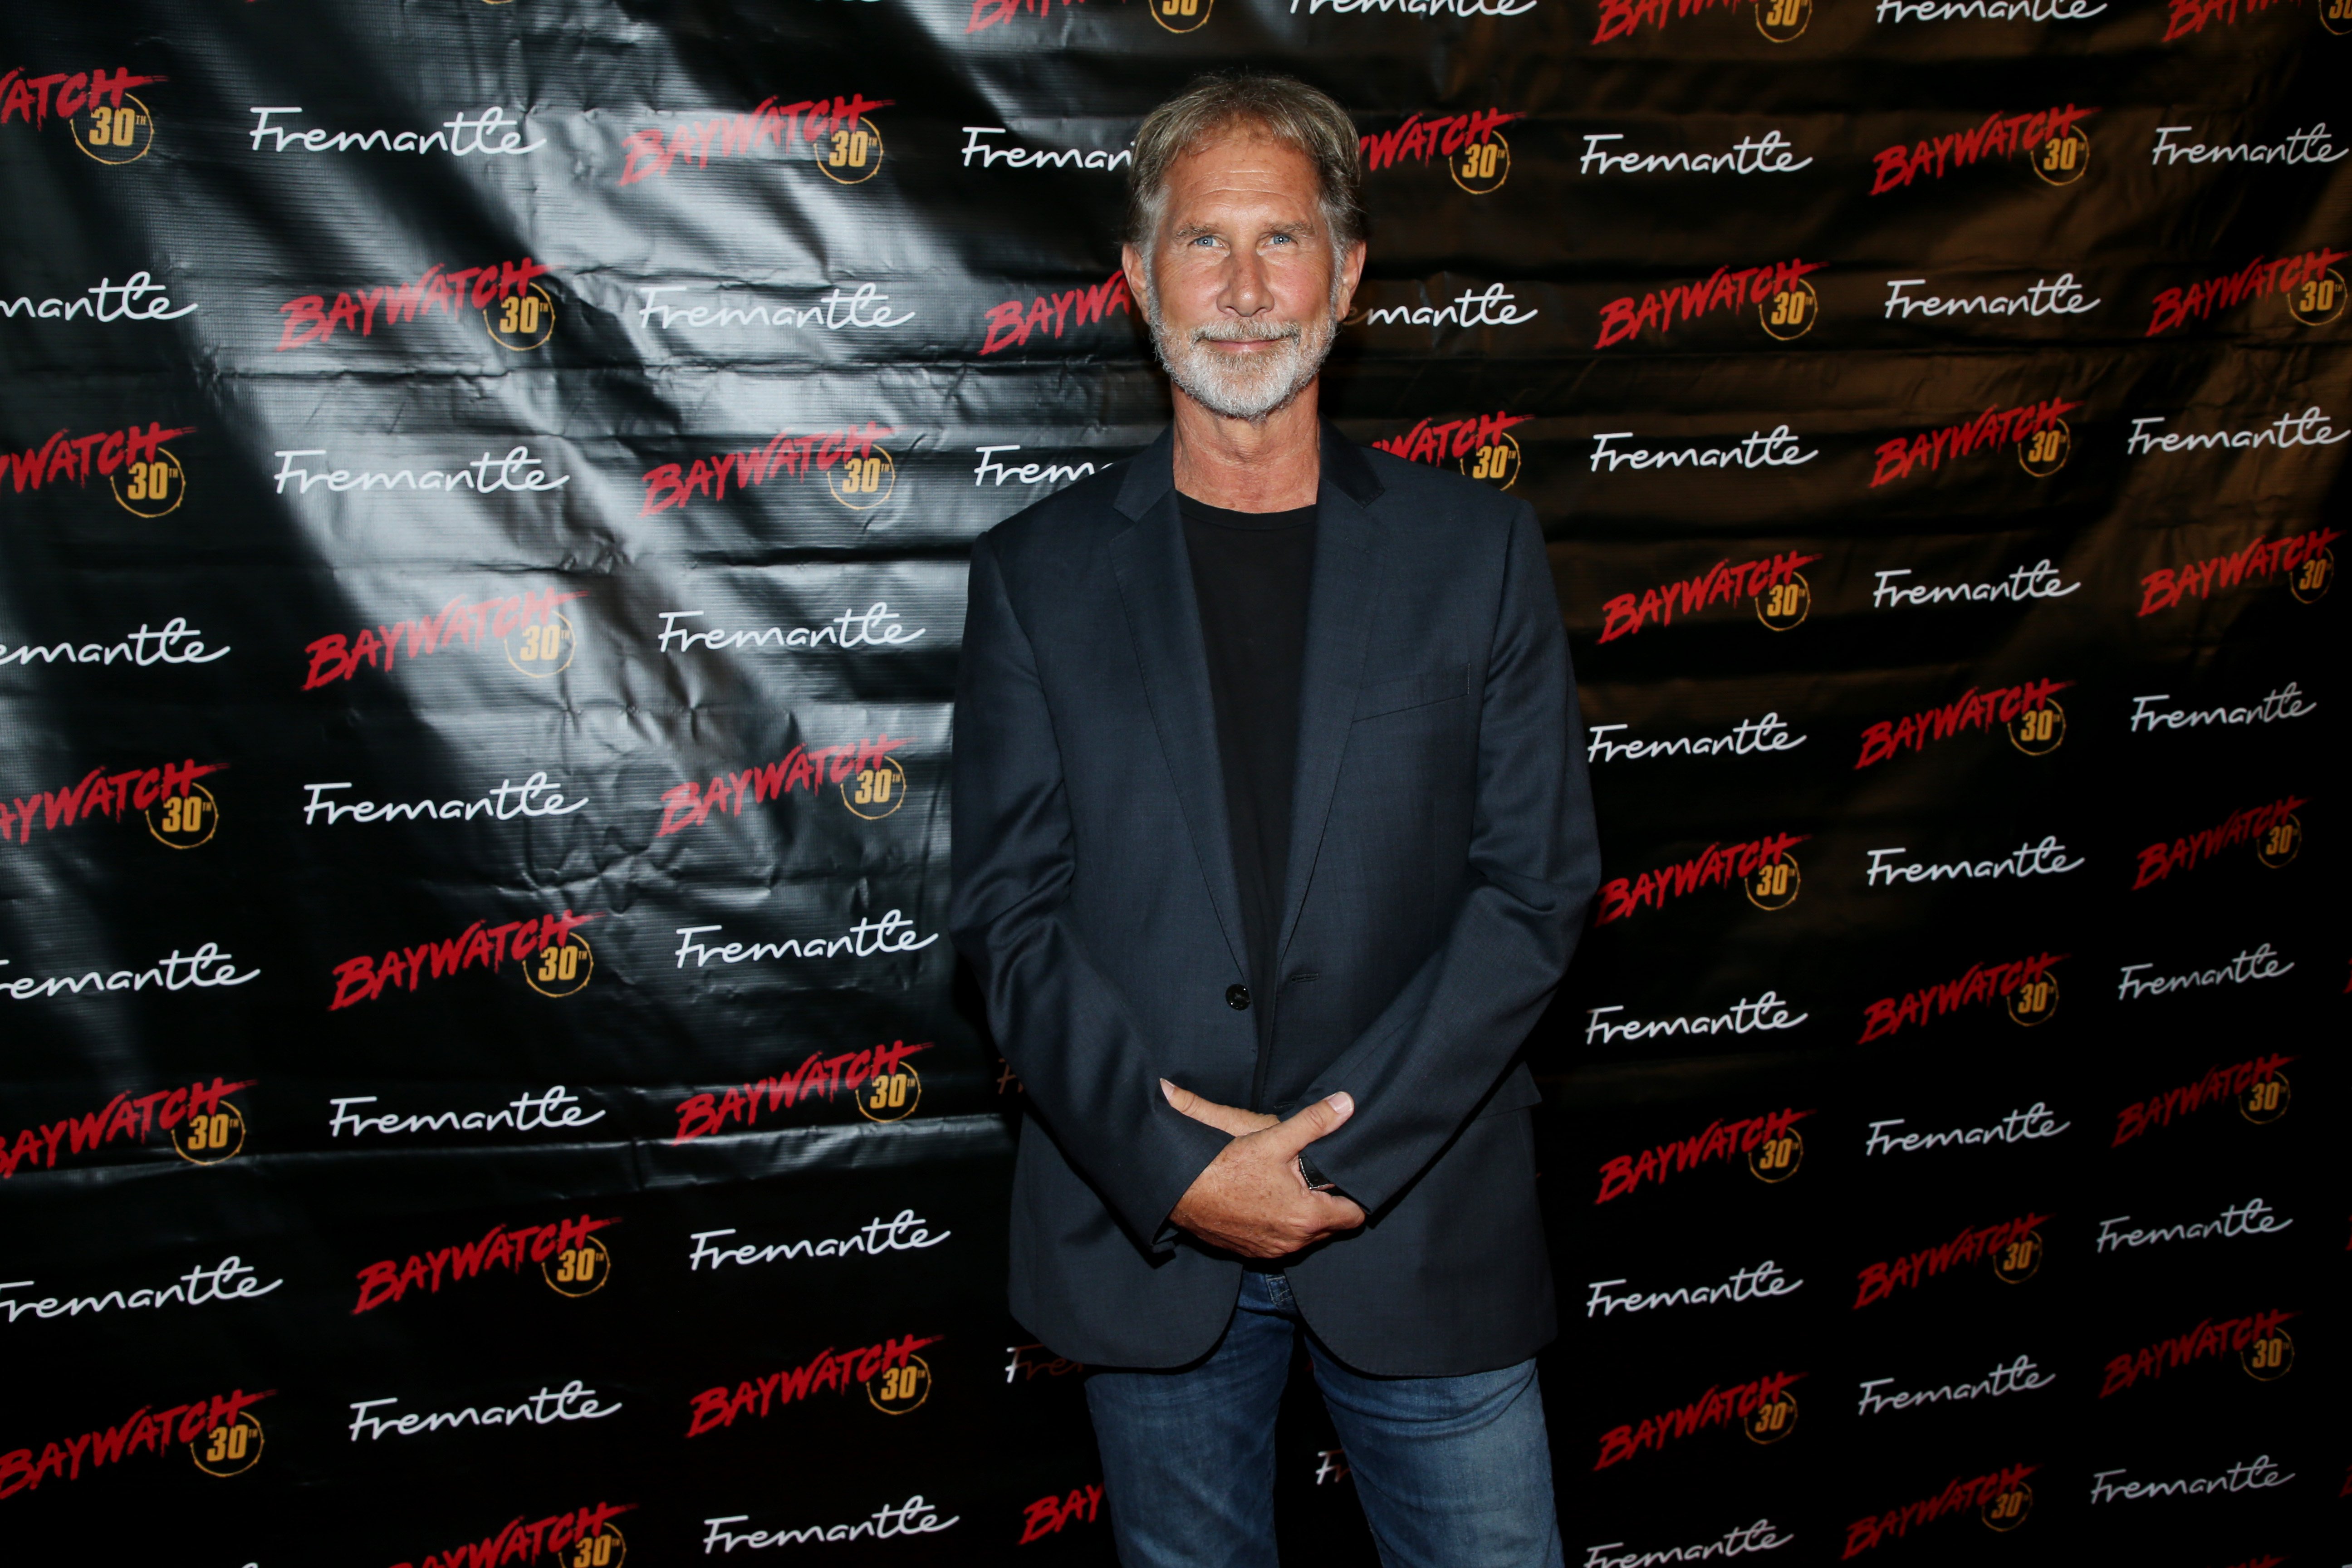 Parker Stevenson attends the 30th anniversary of "Baywatch" at the Viceroy Hotel on September 24, 2019 | Photo: Getty Images